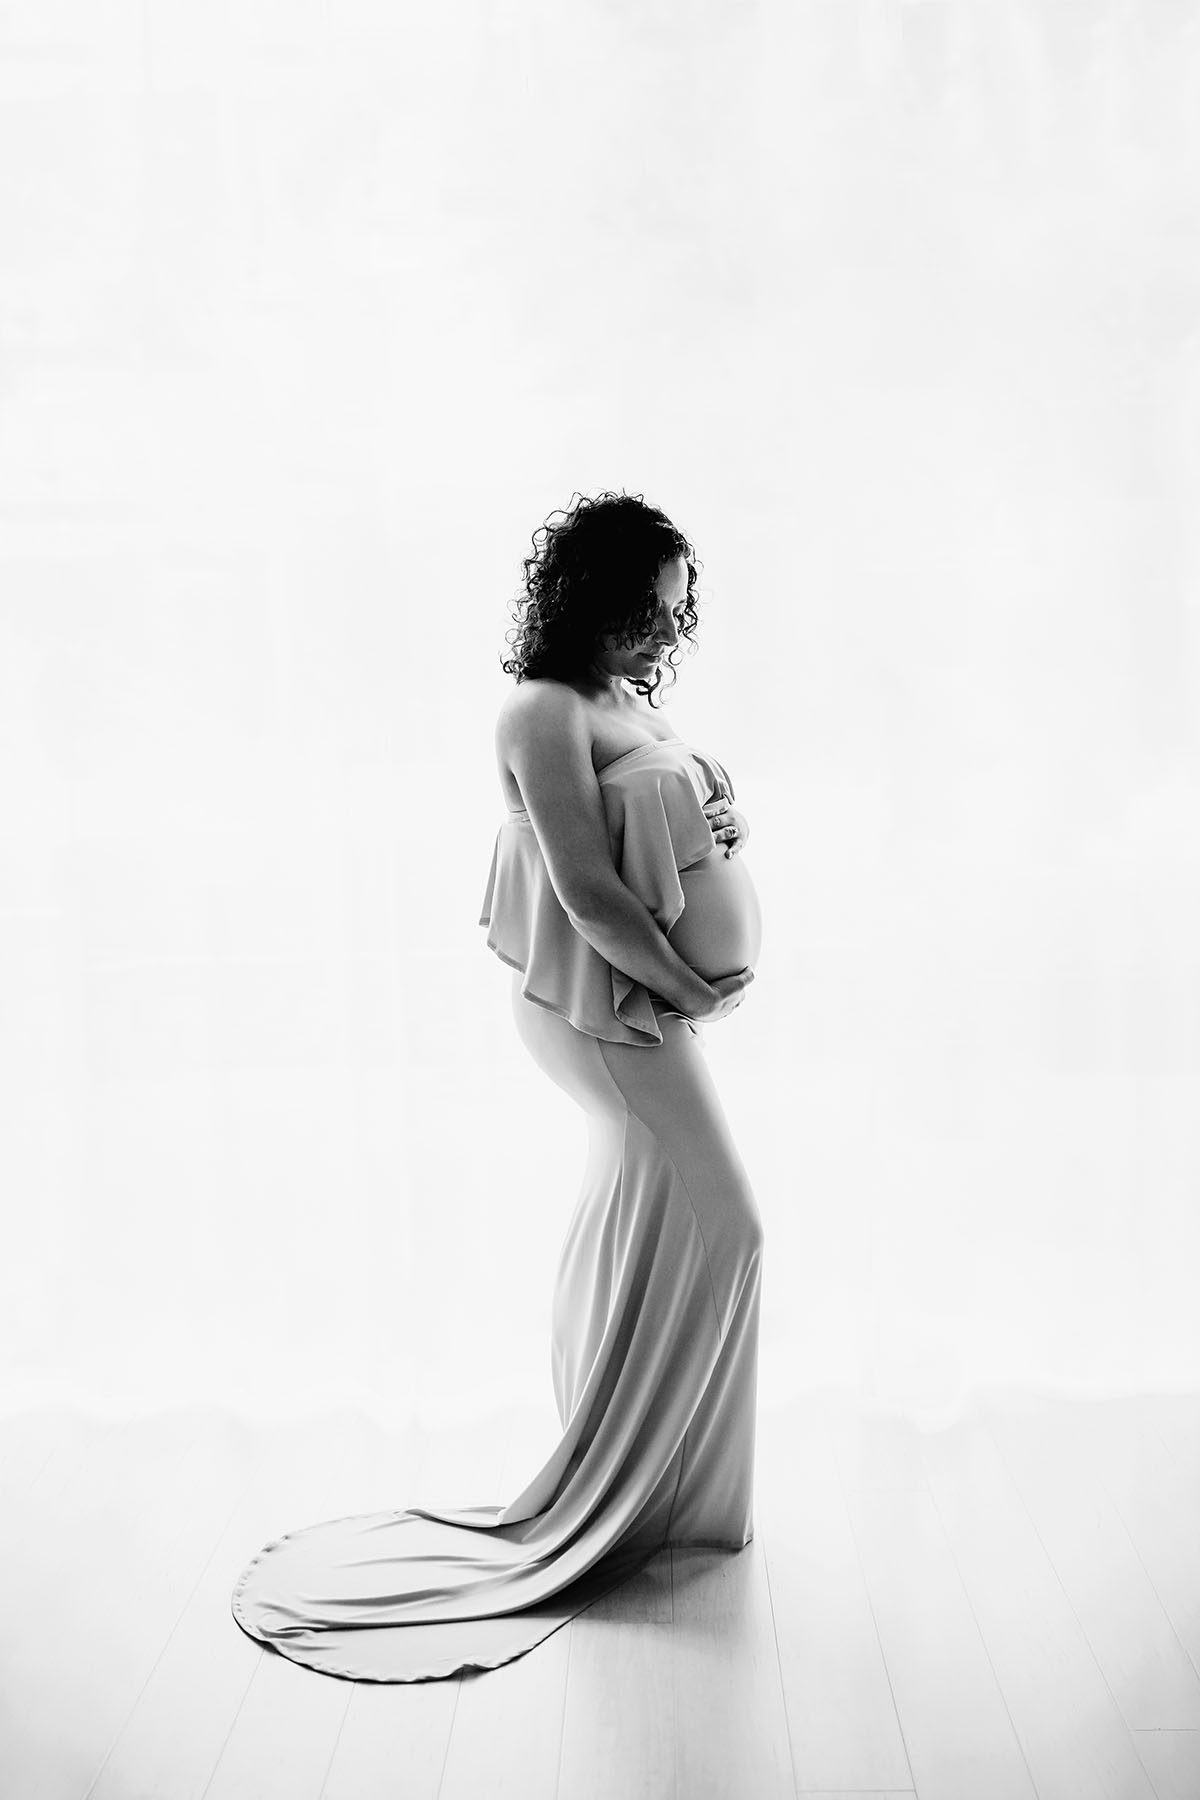 A pregnant woman stands backlit against a bright window